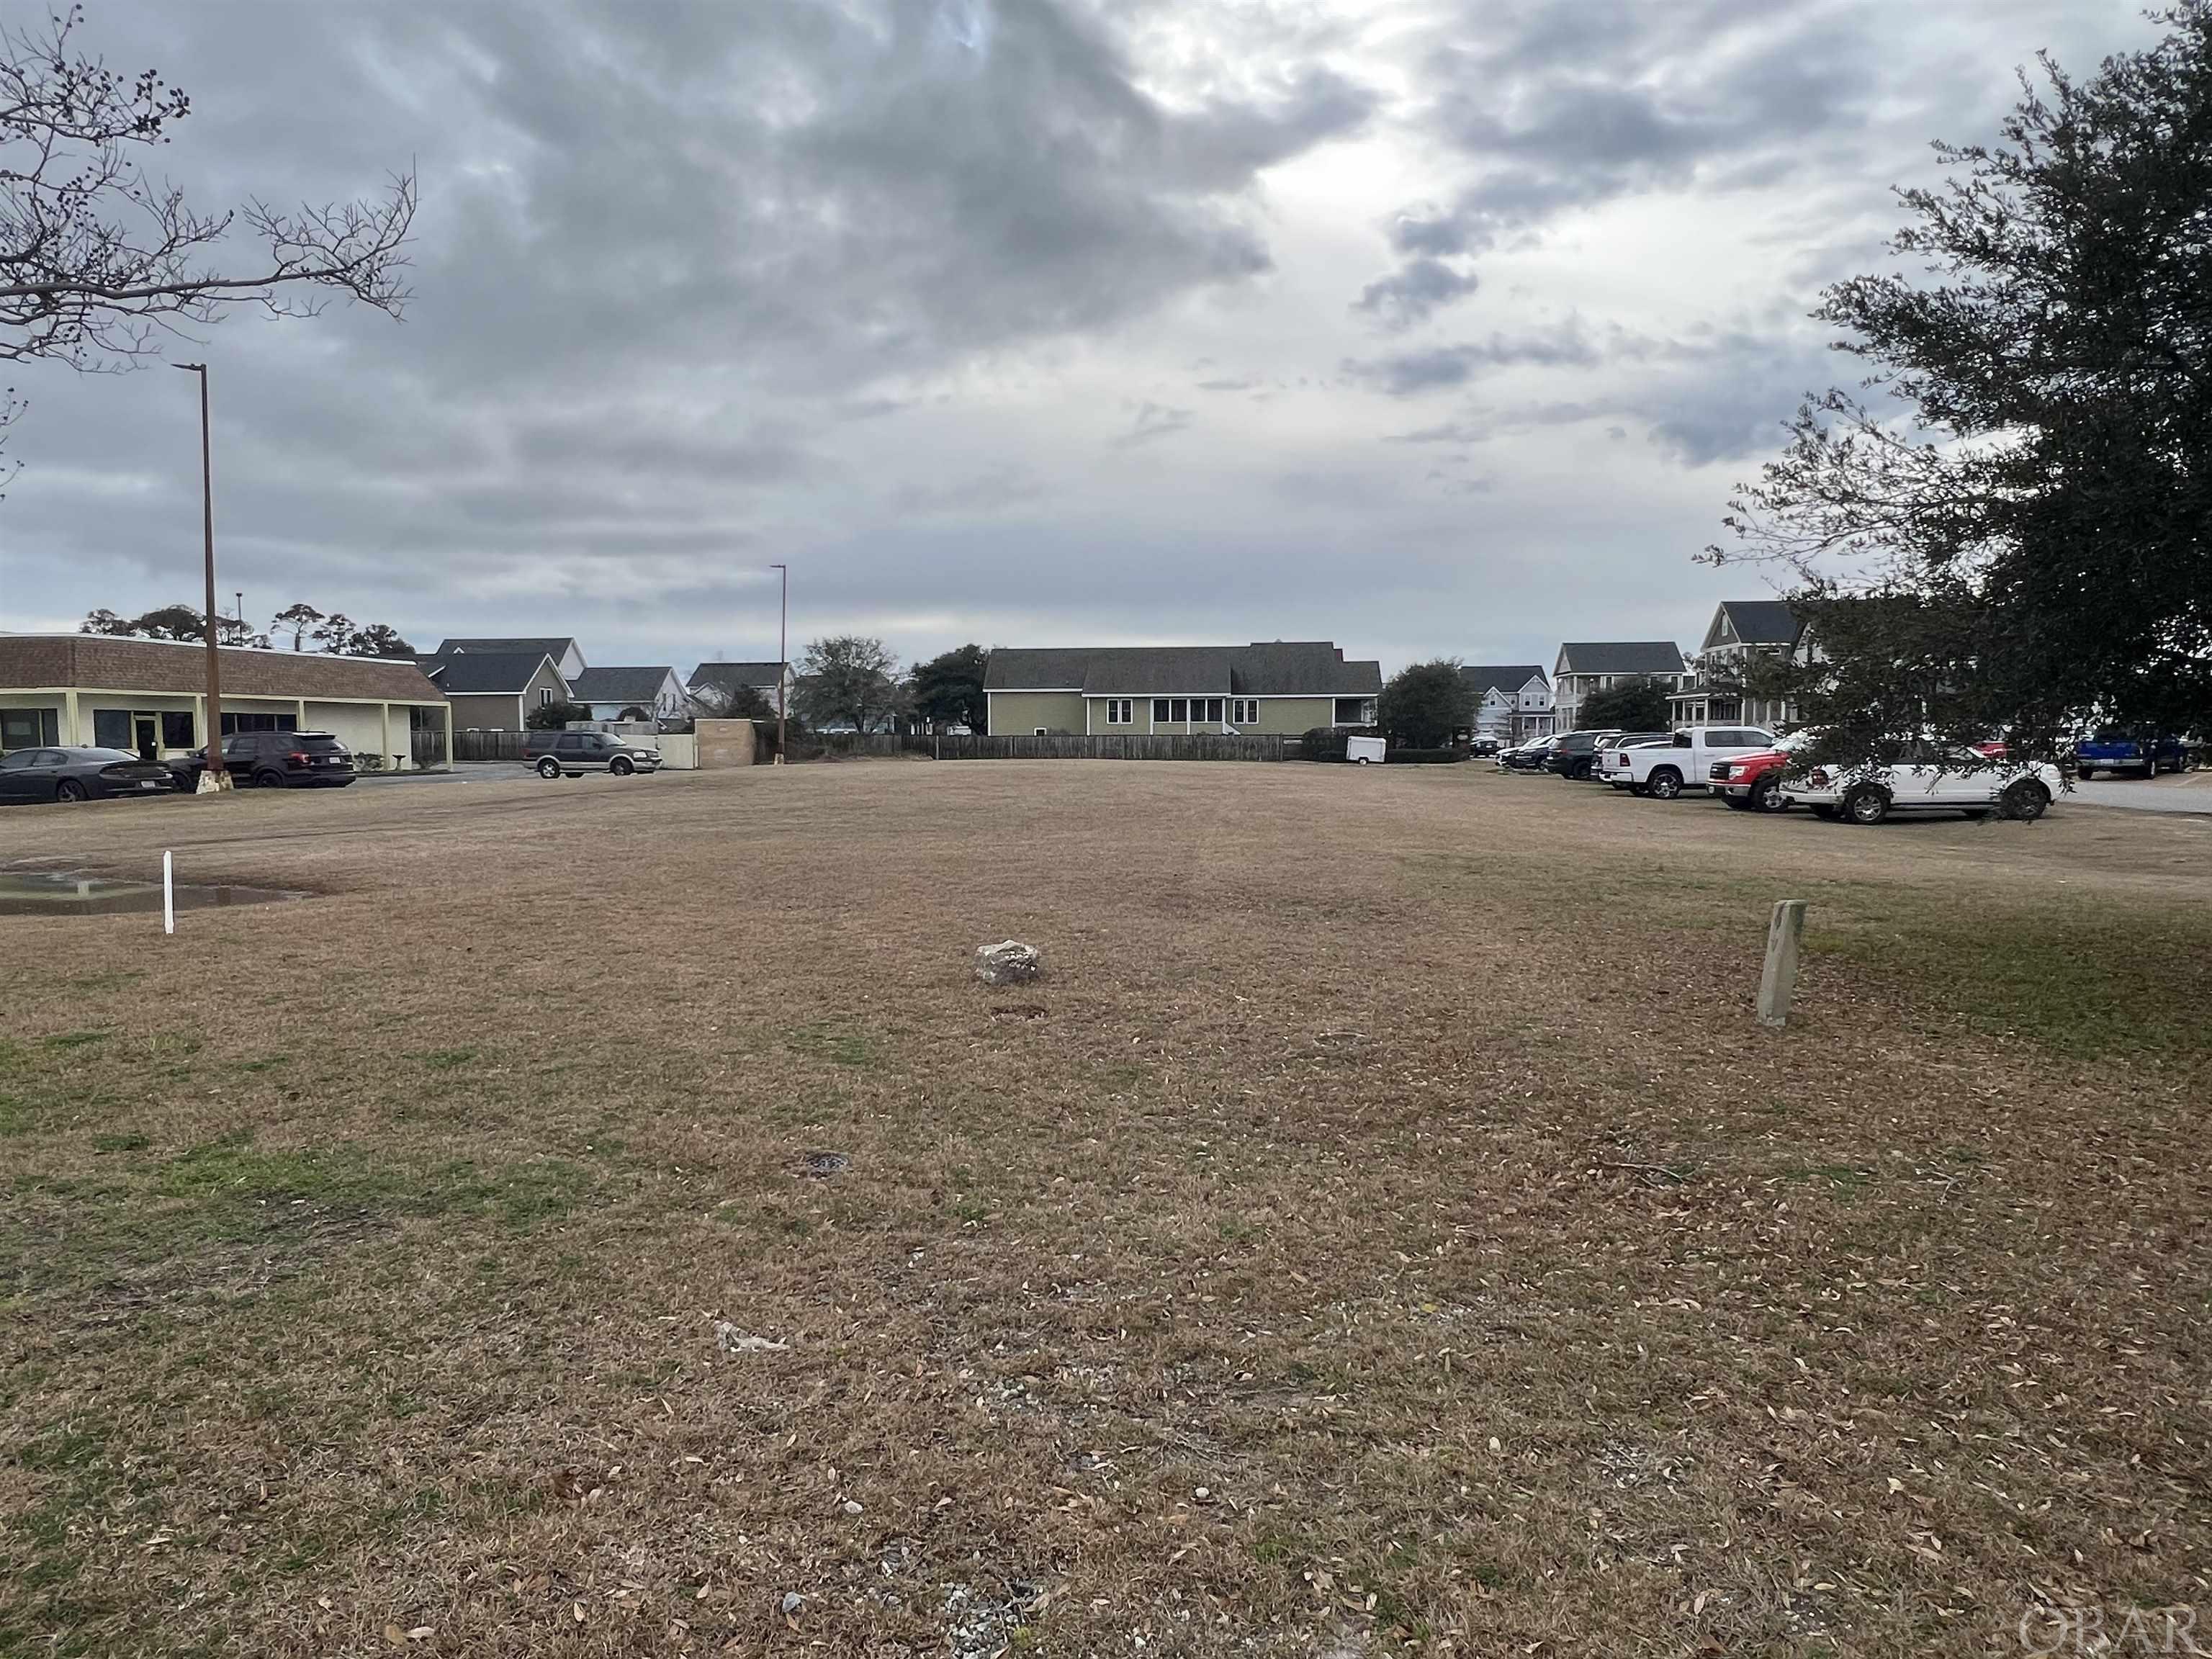 This commercial lot is cleared and ready for your commercial adventure. Almost 3/4 of an acre with a prime location with B-3 zoning allows for many uses for this lot. Municipal water and sewer is available for this property and it is a short drive to Downtown Manteo and the Beach.